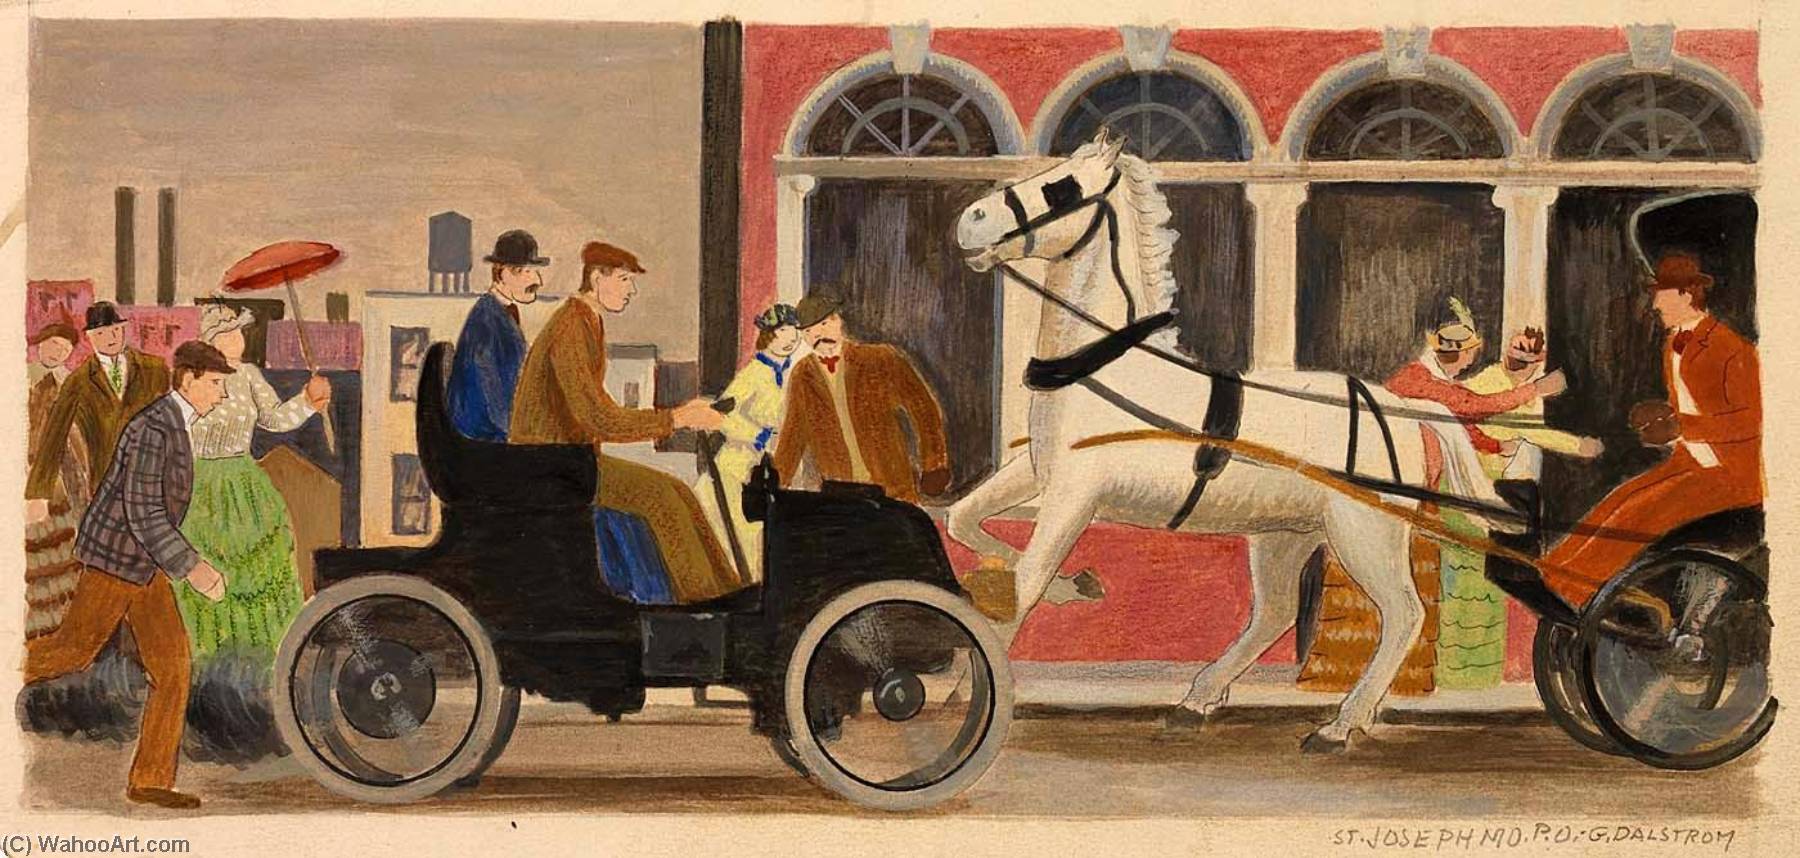 Order Artwork Replica Horseless Carriage (mural study, St. Joseph, Missouri Post Office and Courthouse), 1941 by Gustaf Oscar Dalström (Inspired By) (1893-1971) | ArtsDot.com